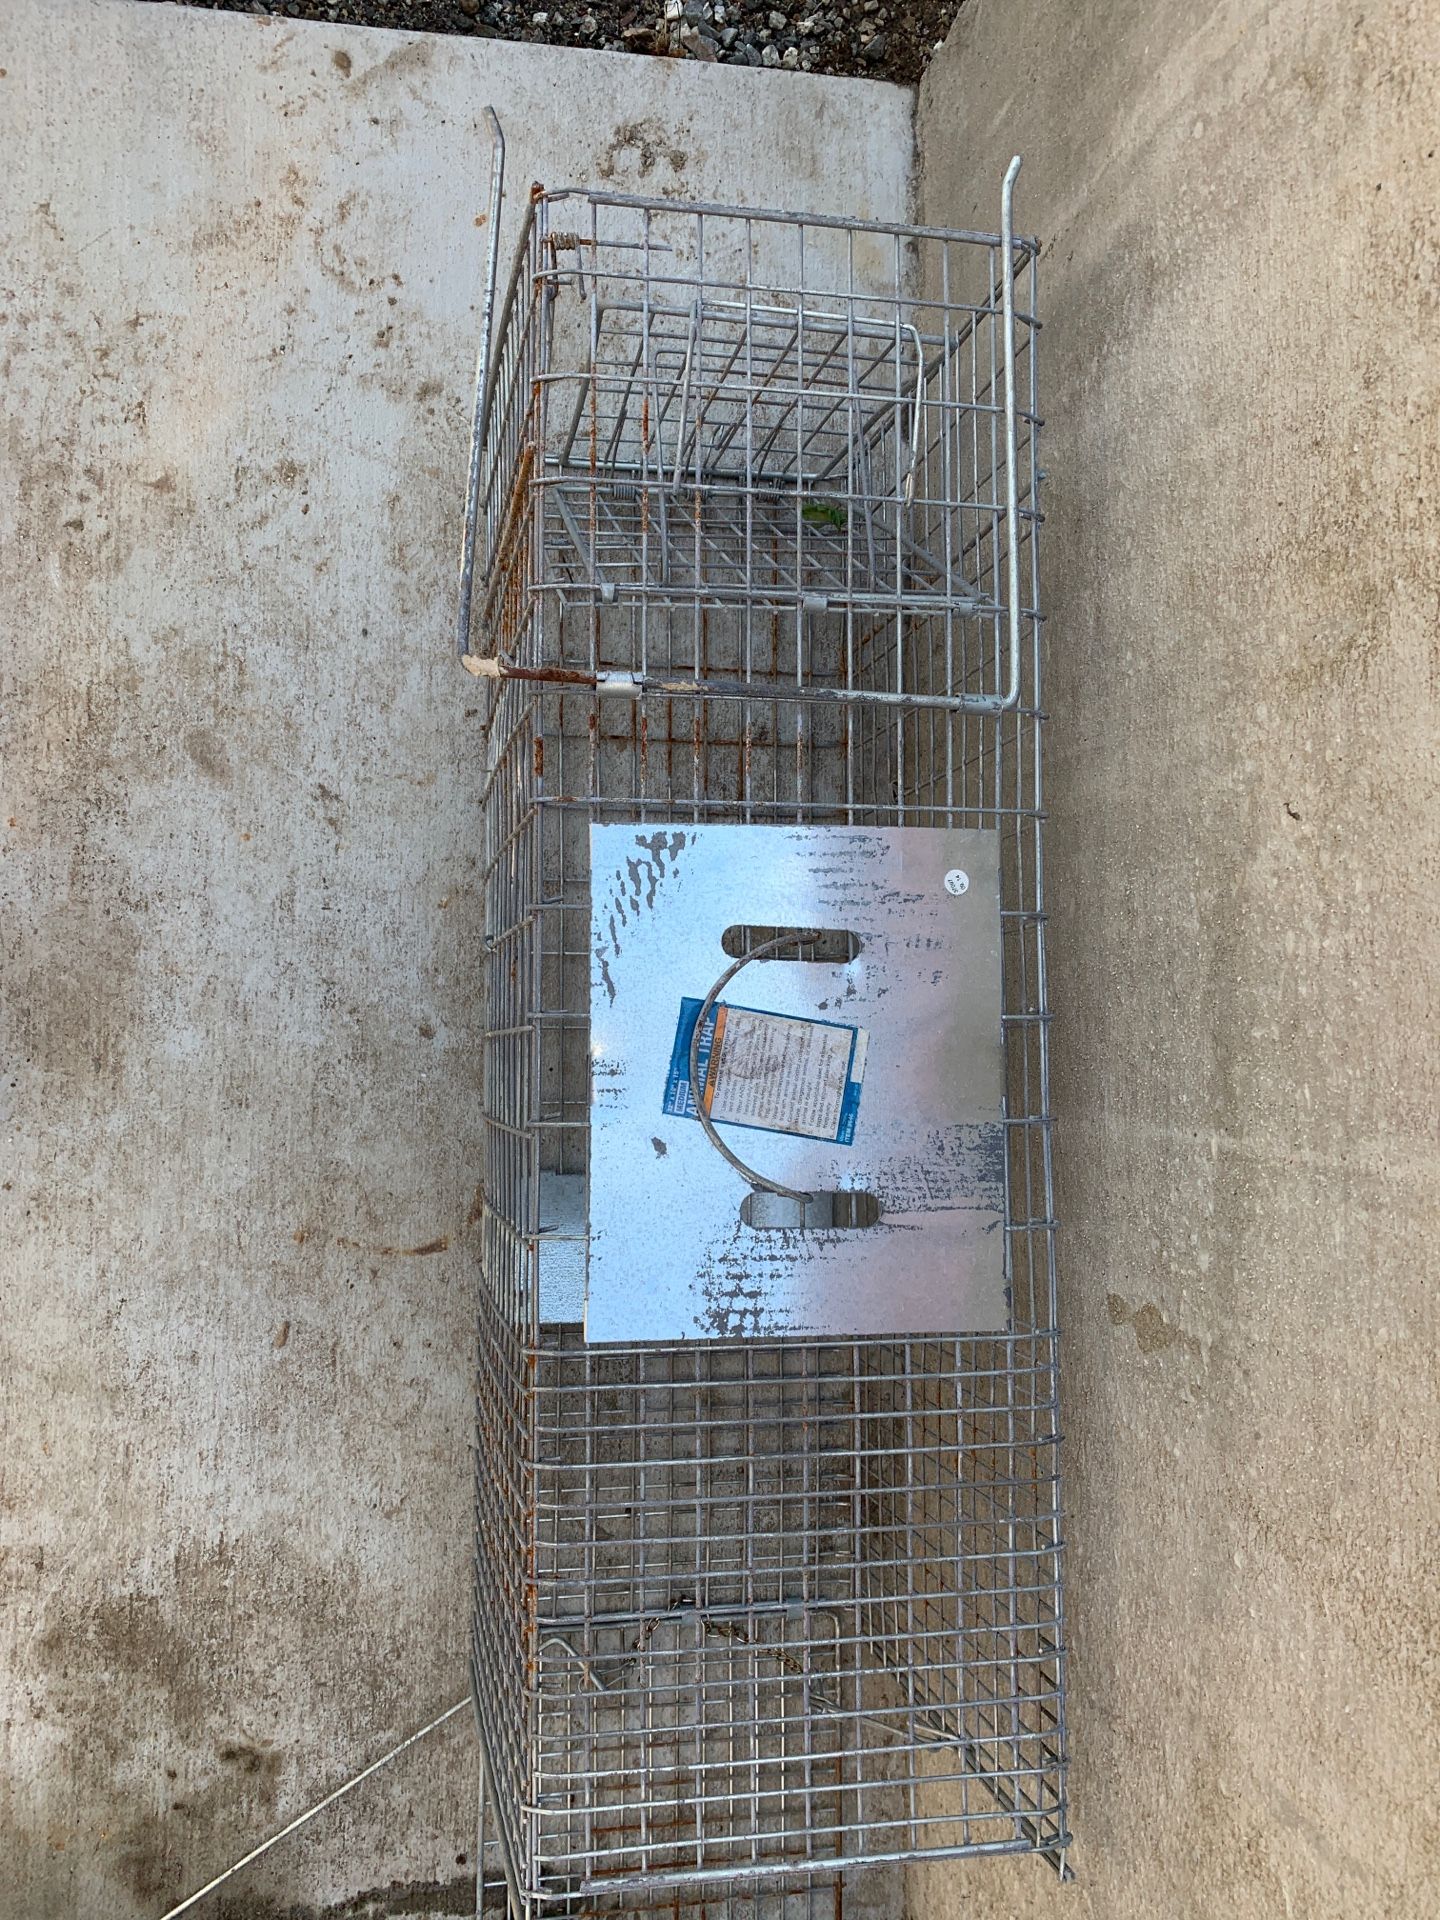 Metal wire animal cage/trap